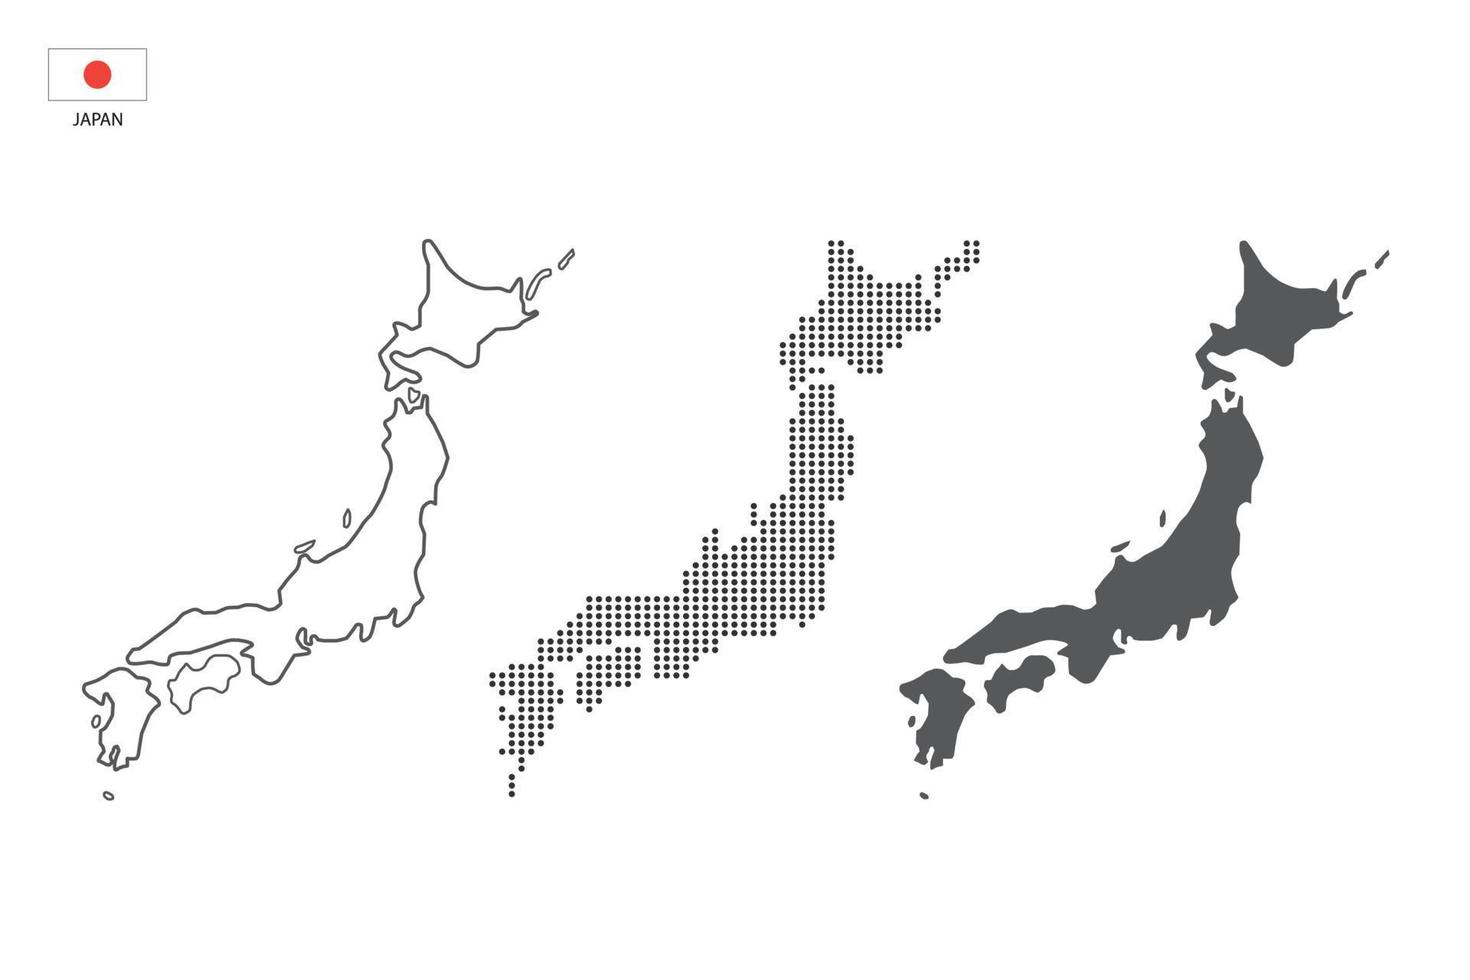 3 versions of Japan map city vector by thin black outline simplicity style, Black dot style and Dark shadow style. All in the white background.